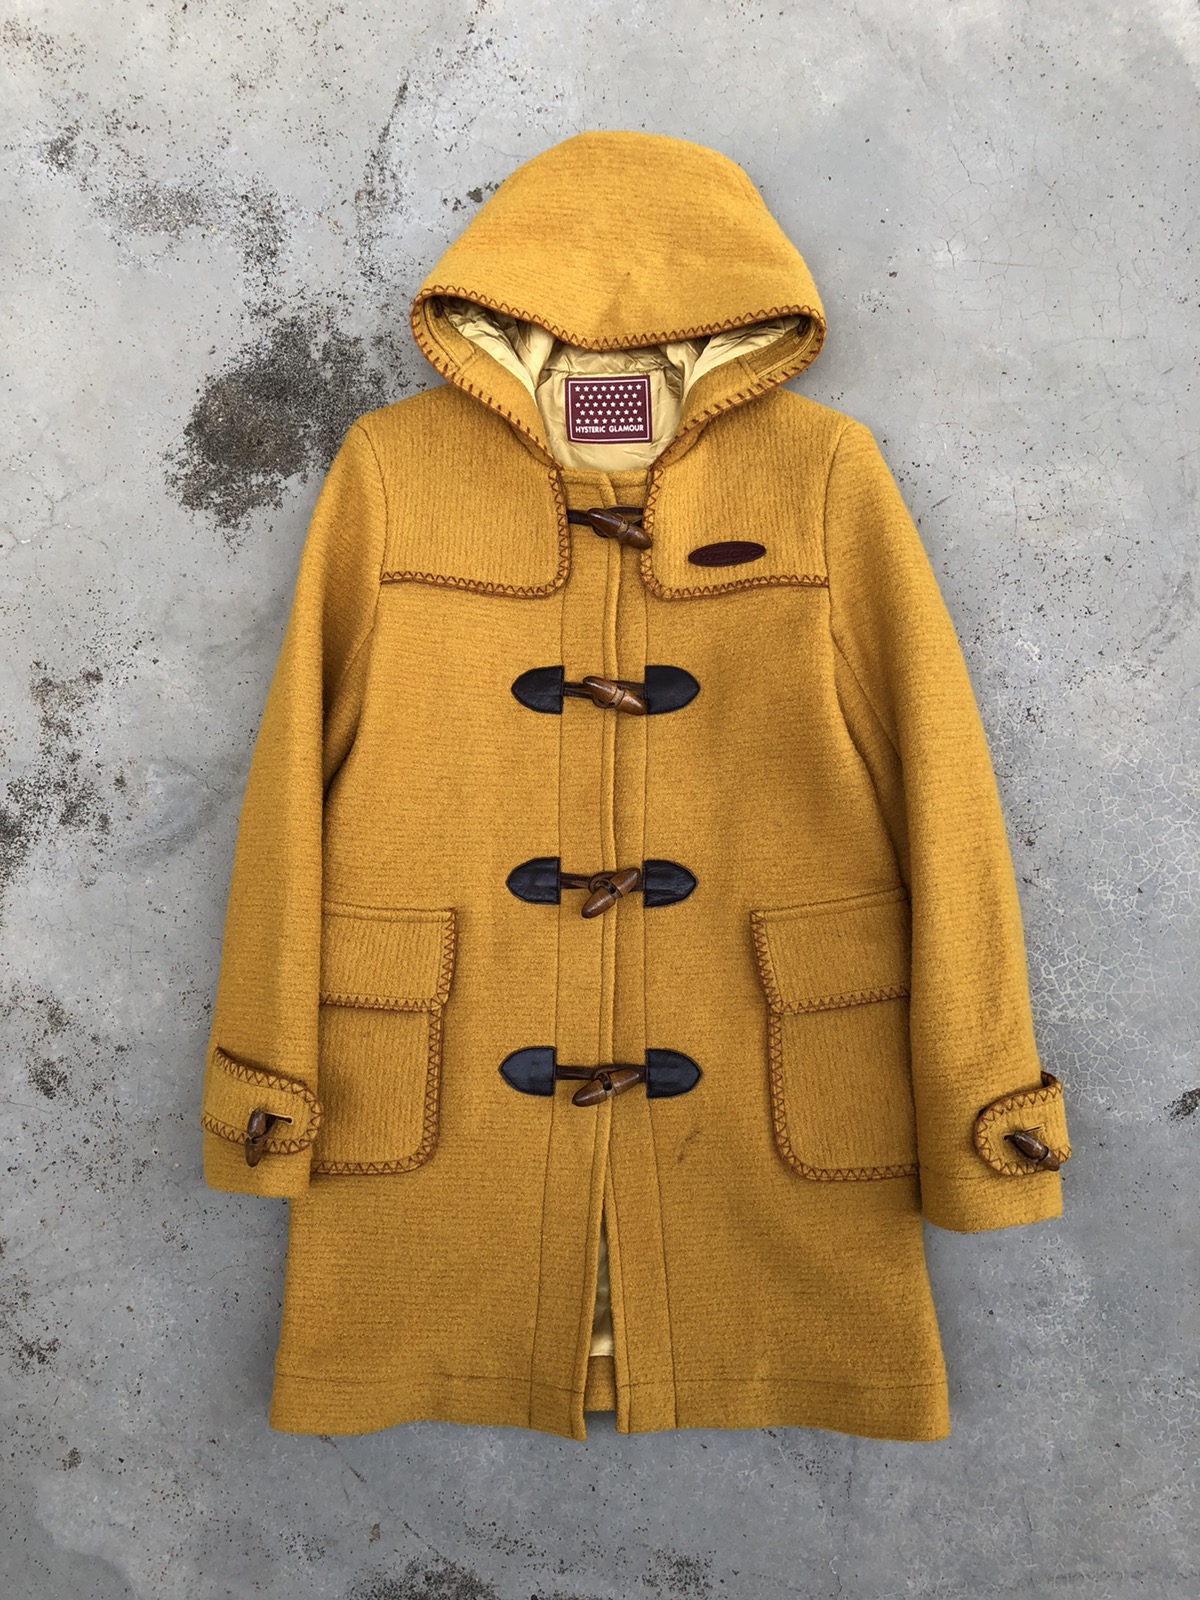 🔥HYSTERIC GLAMOUR DUFFEL COAT MADE IN JAPAN - 4